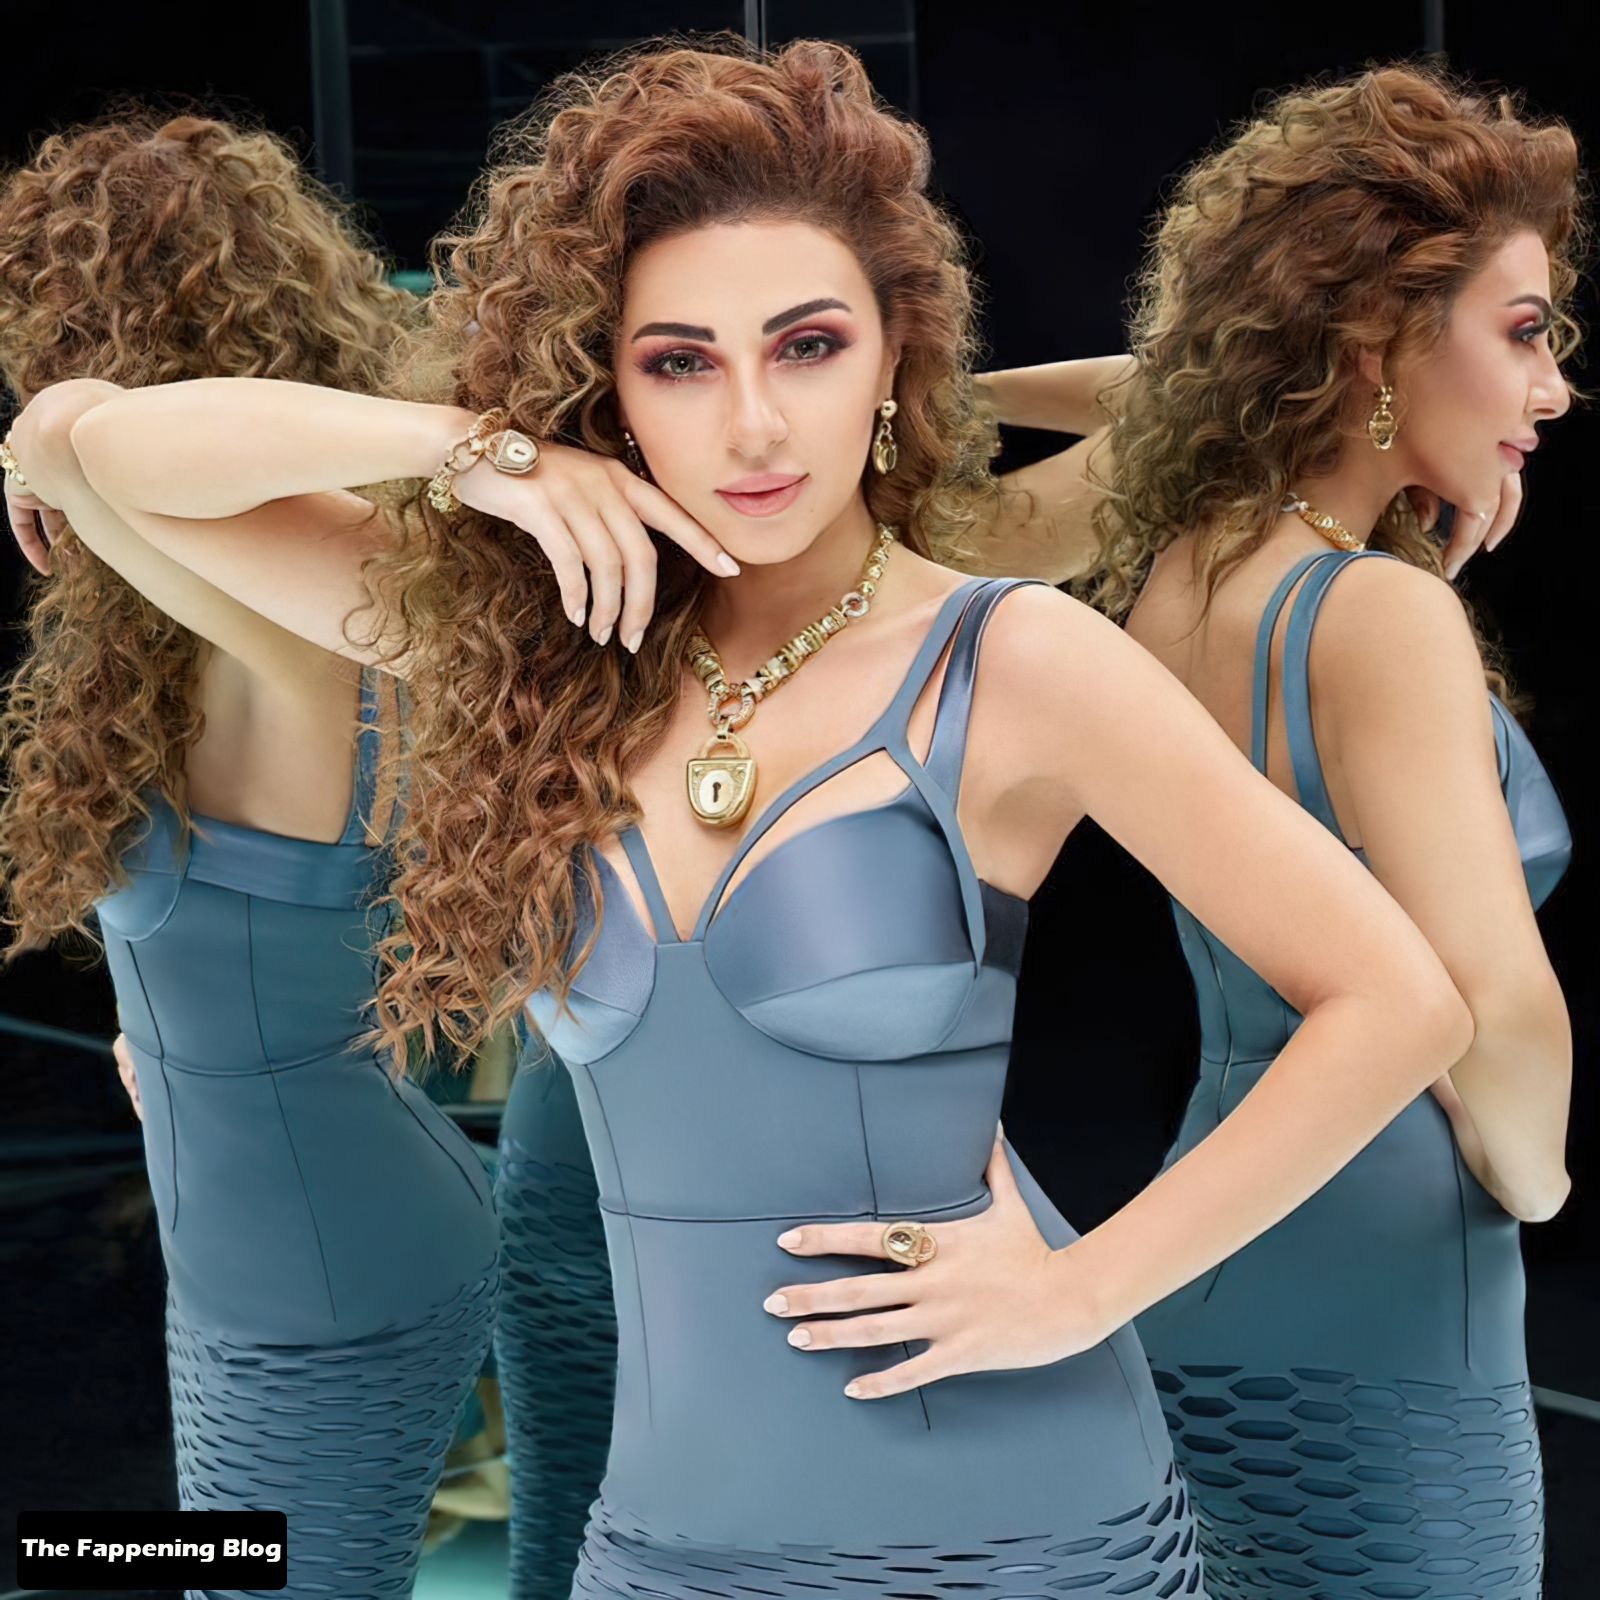 Myriam-Fares-Sexy-Collection-The-Fappening-Blog-42.jpg